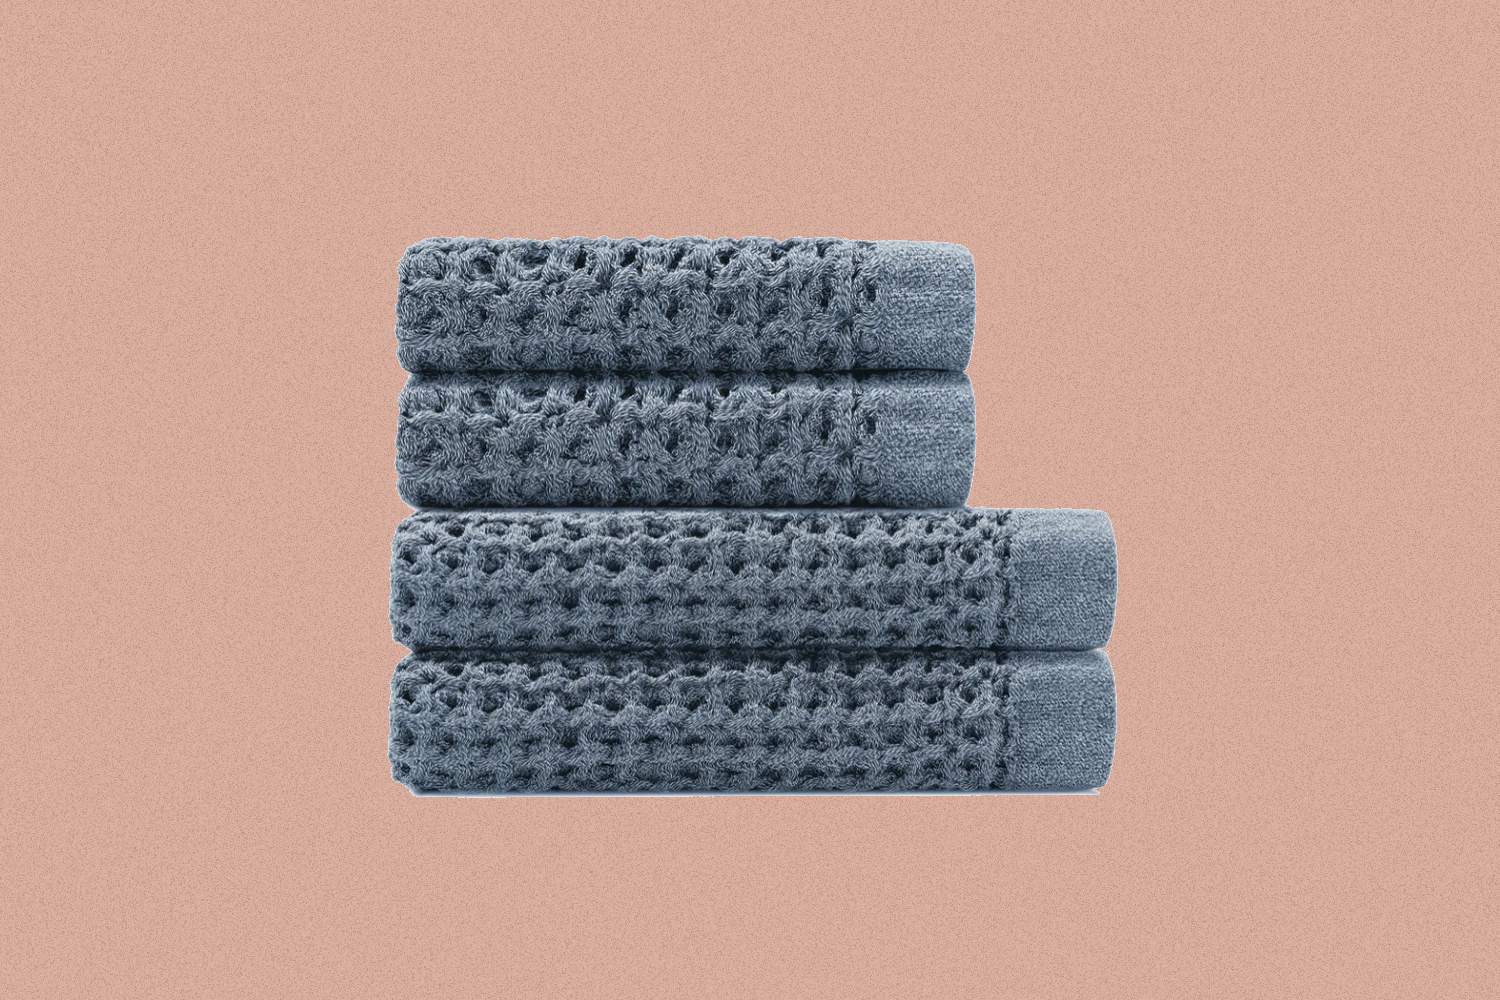 Deal: Our Favorite Towels Are 15% Off at Huckberry